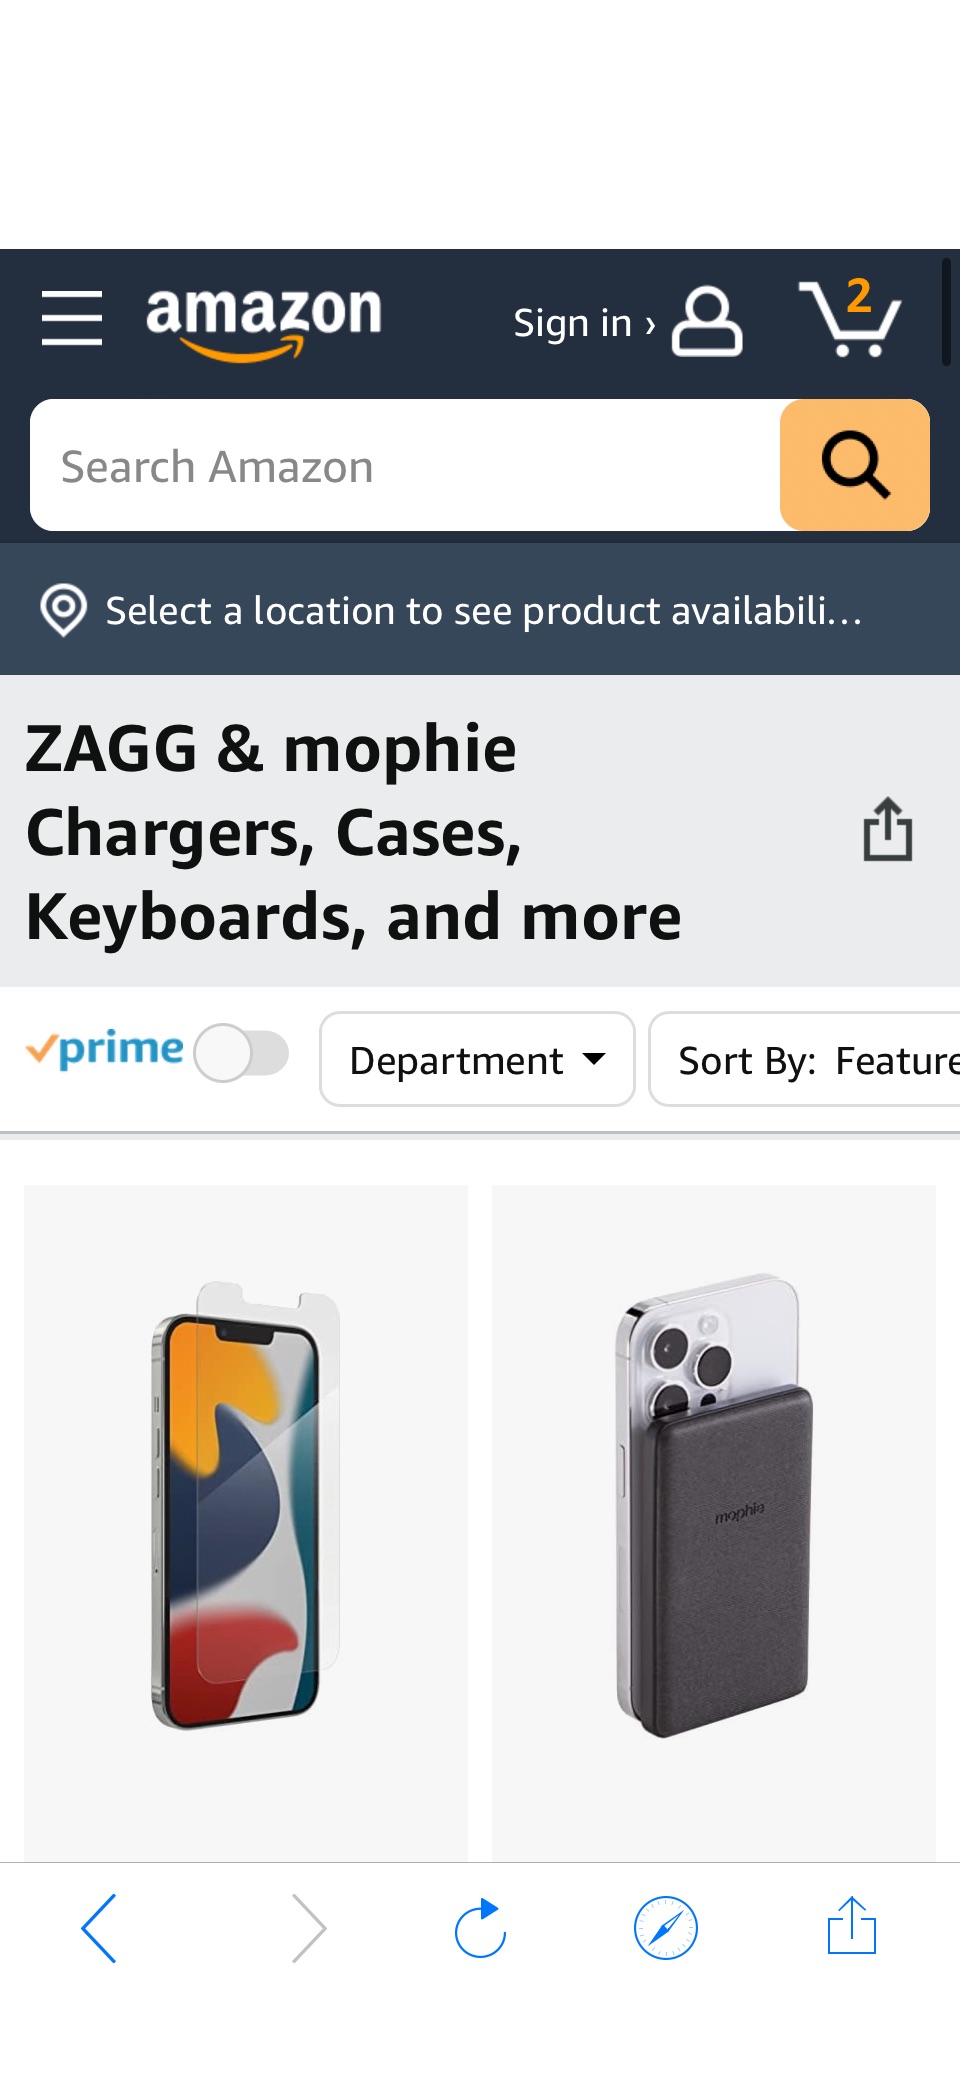 ZAGG & mophie Chargers, Cases, Keyboards, and more促销8.1起